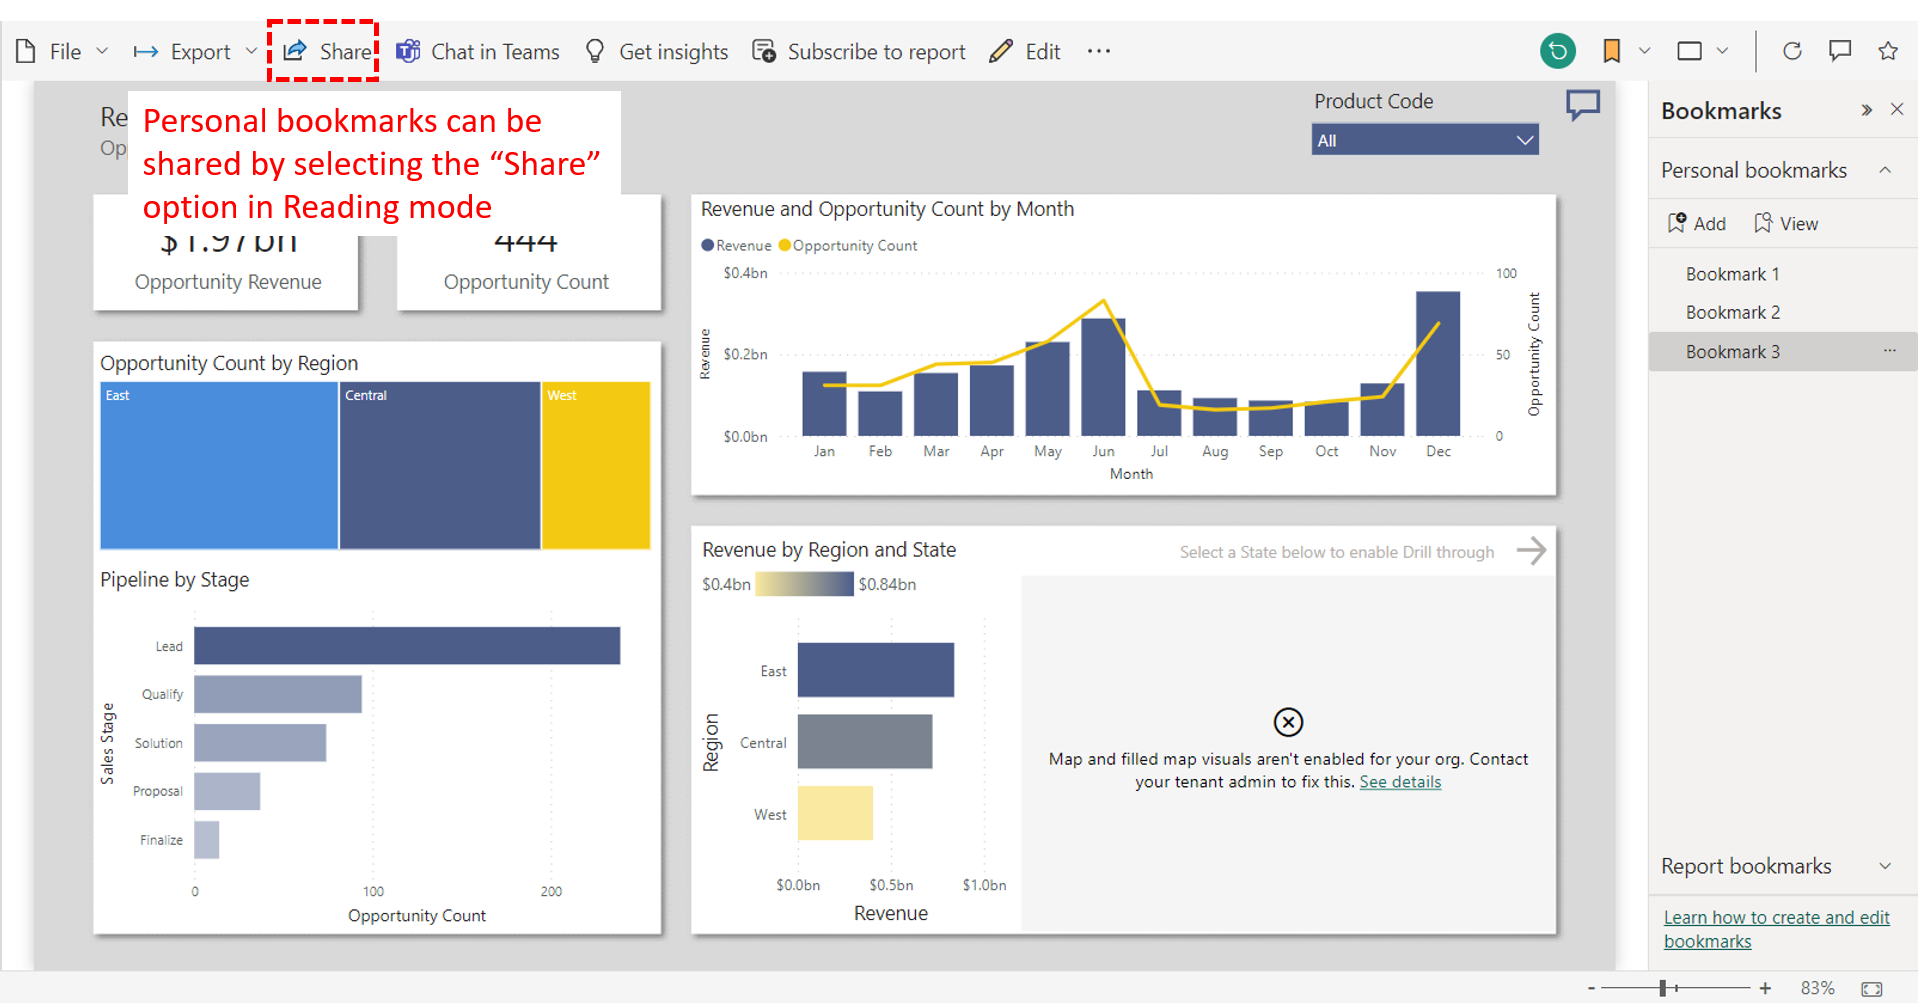 Use the "Share" option to share your personal bookmarks in power bi